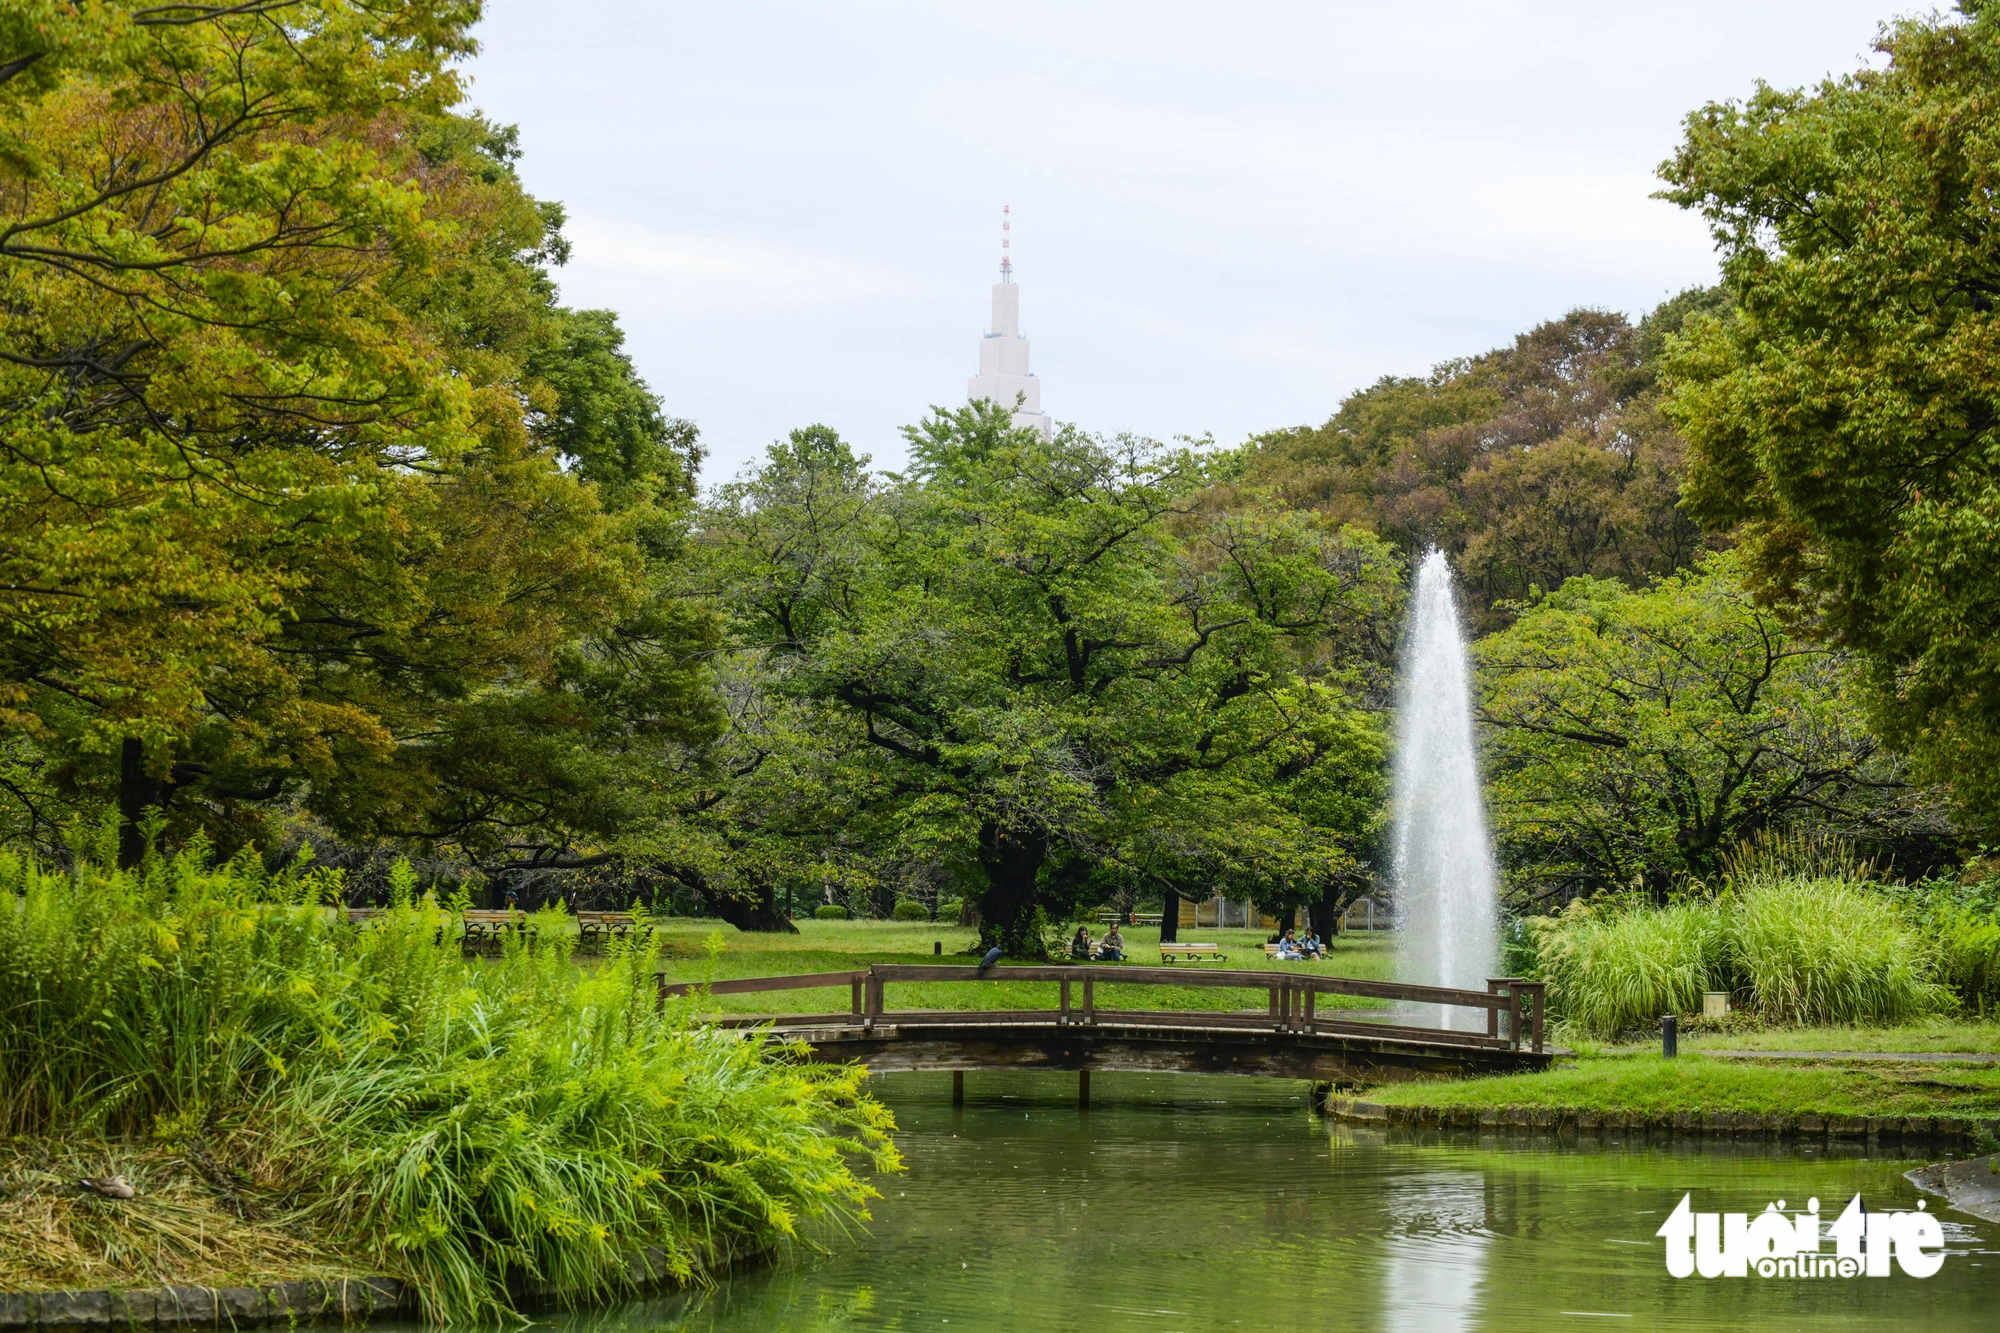 A lake, a fountain, and benches along a path make the park become more romantic